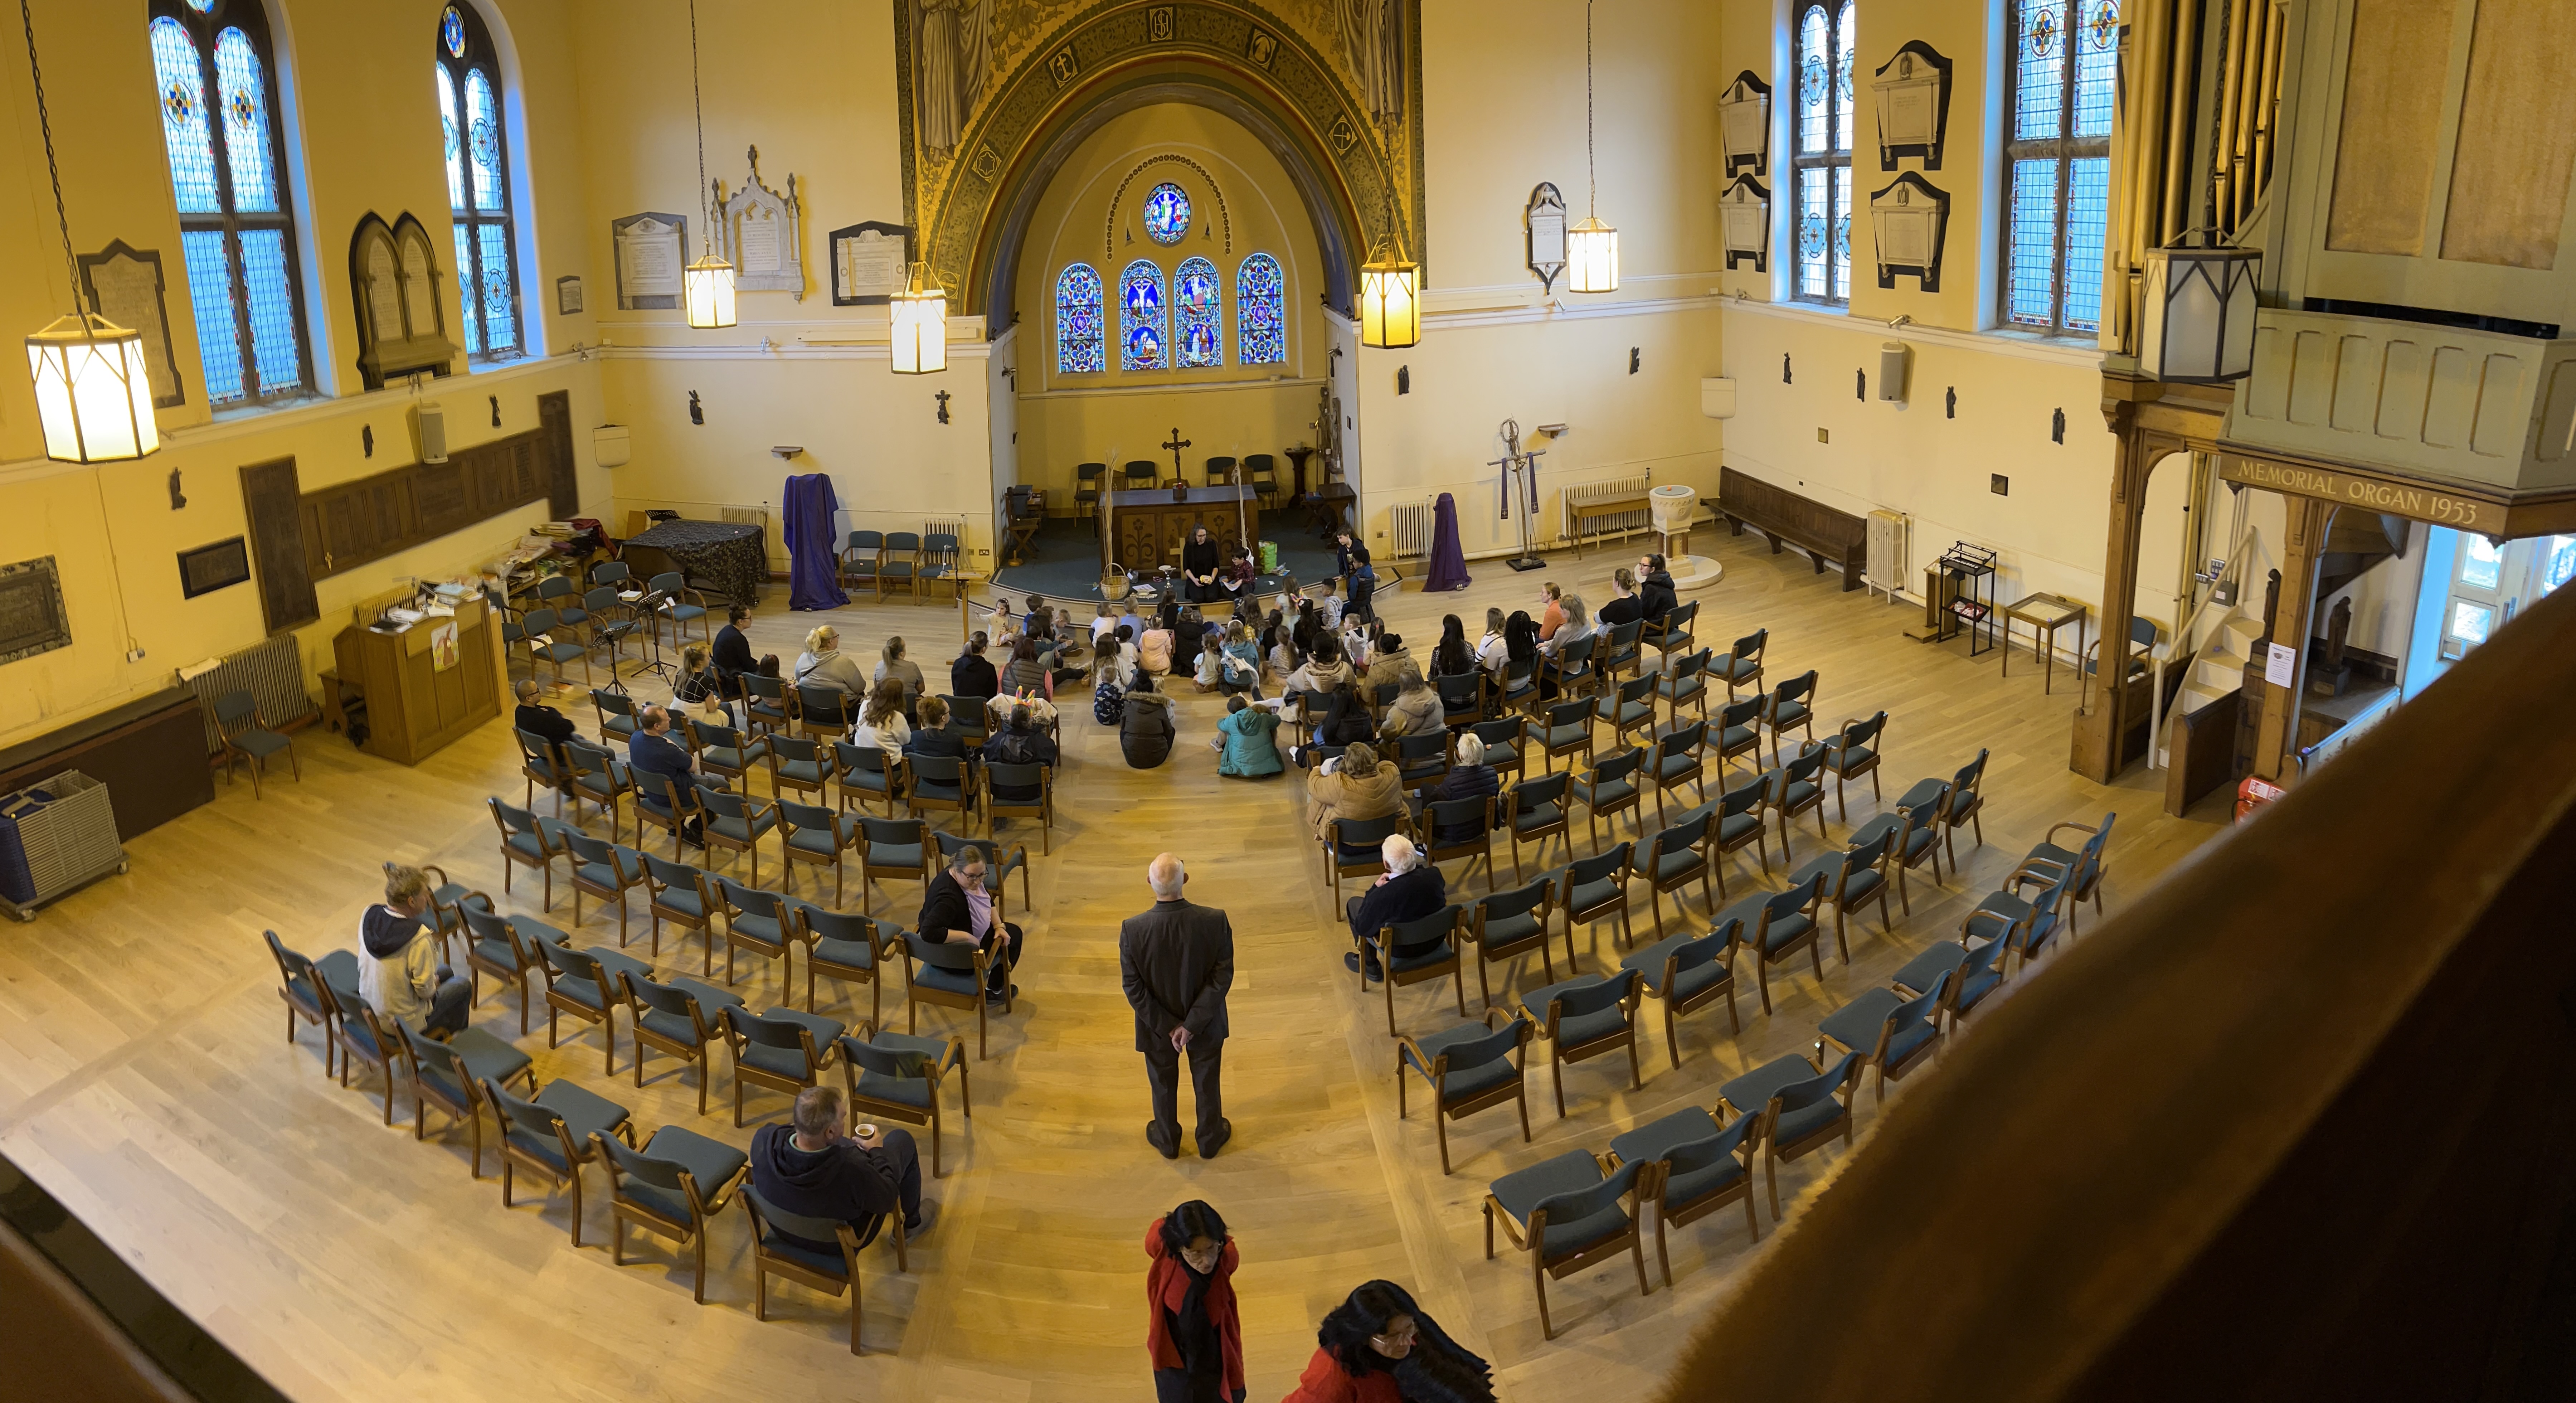 Overhead view of the church with people sat on floor and chairs